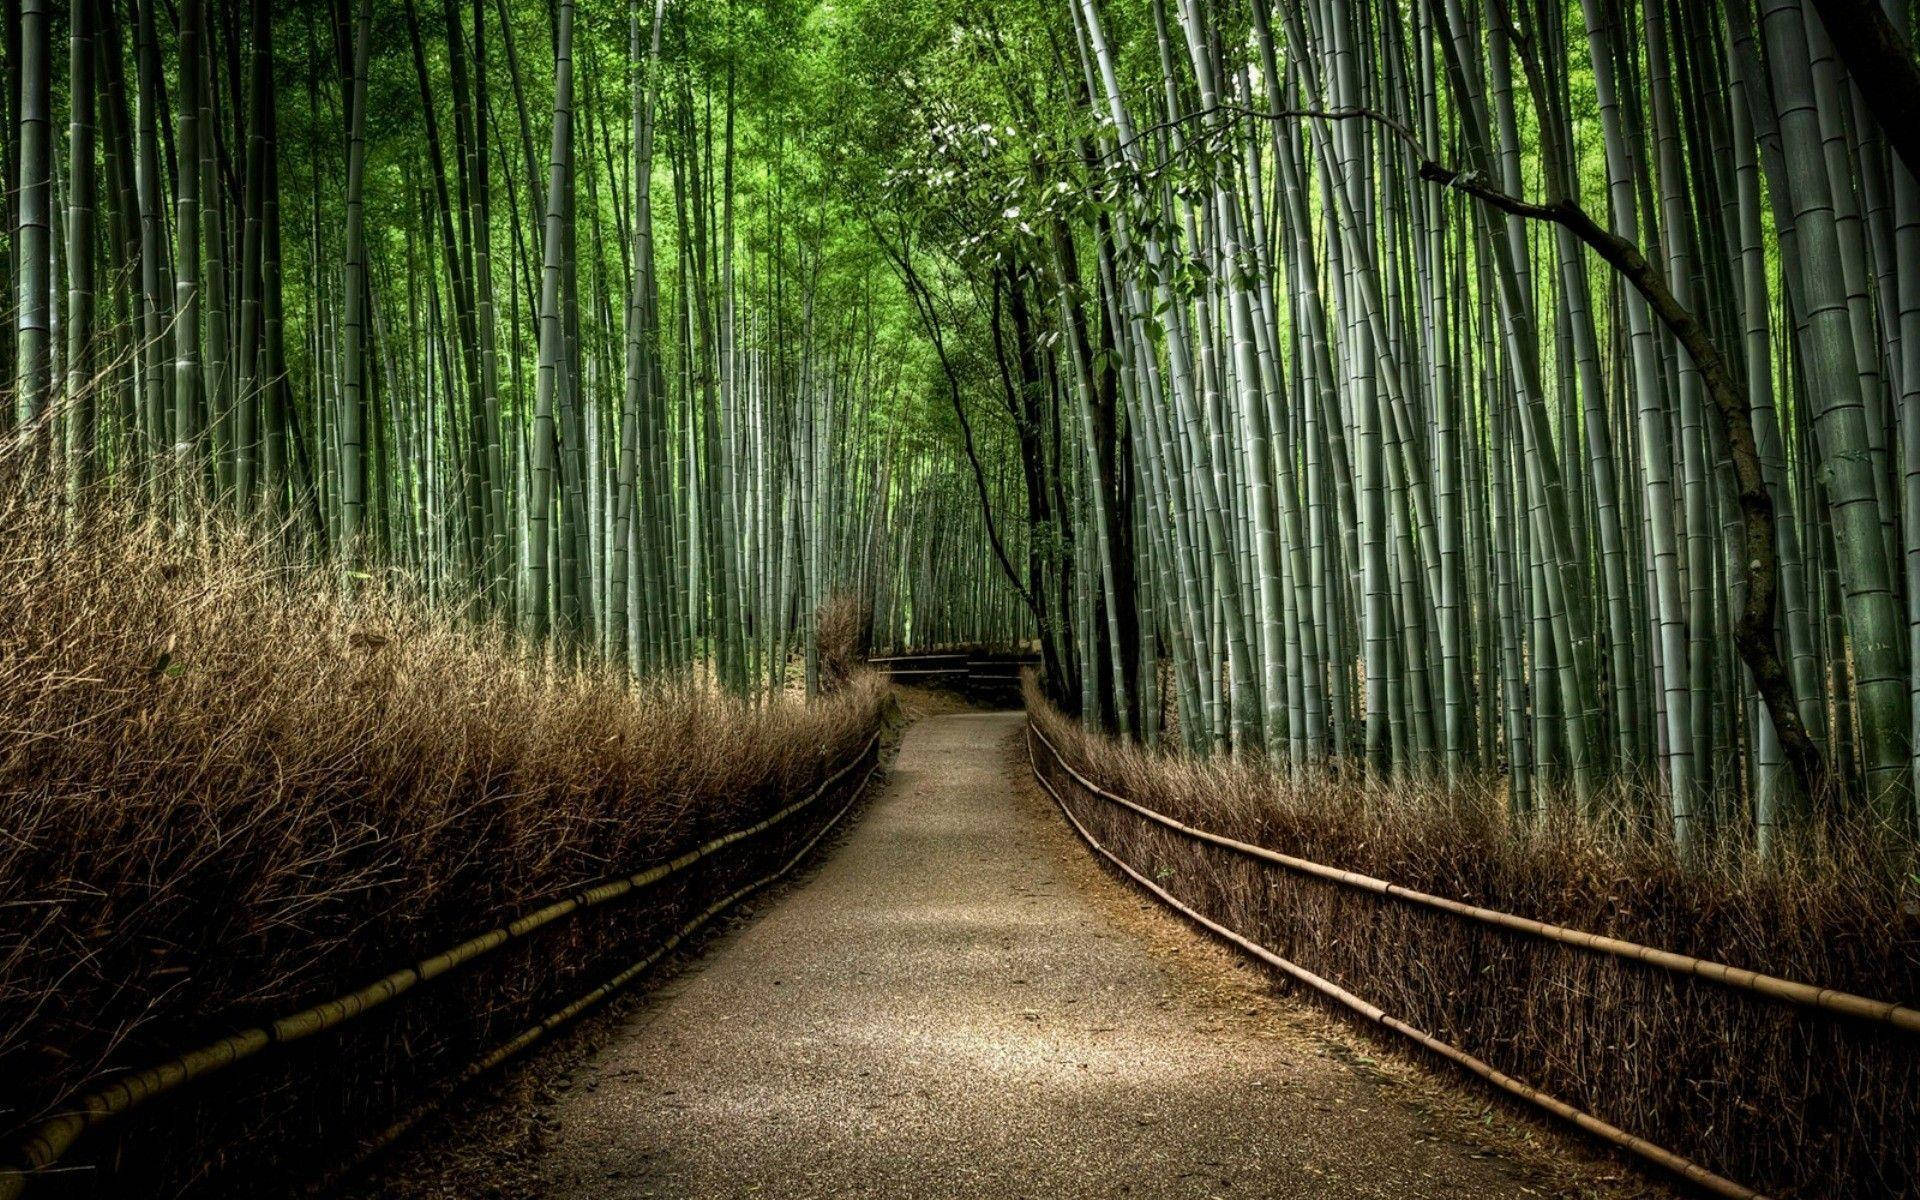 Bamboo Forest Background Wallpaper